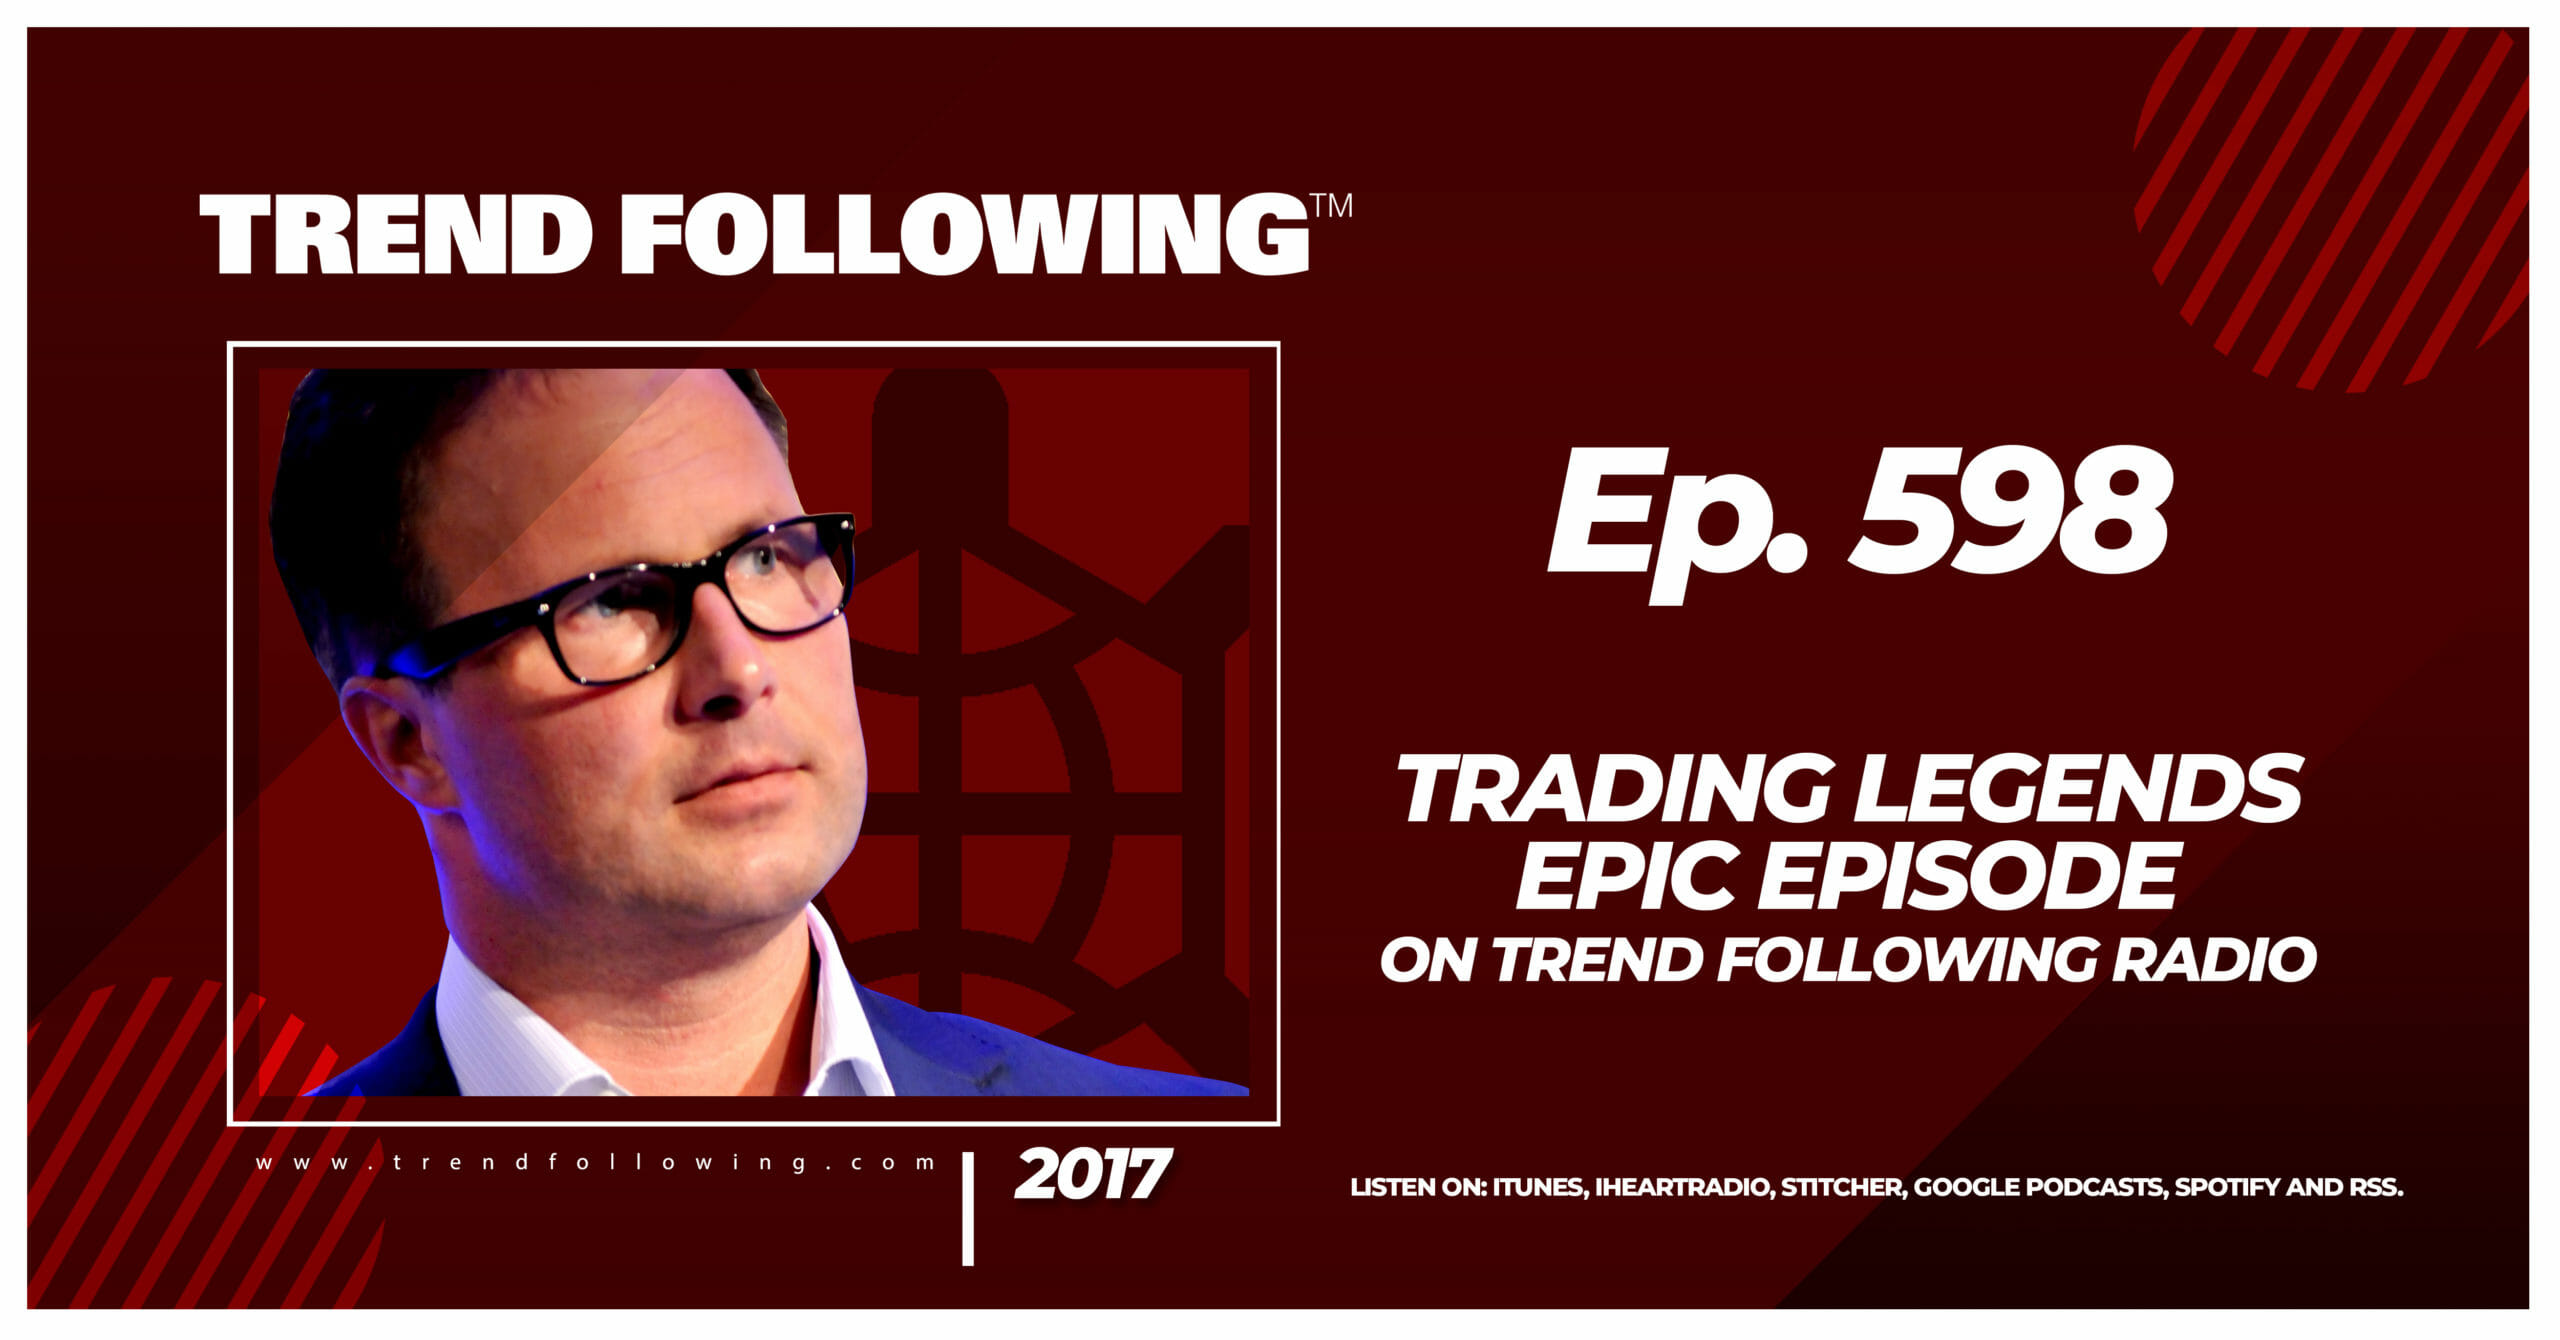 Trading Legends Epic Episode on Trend Following Radio